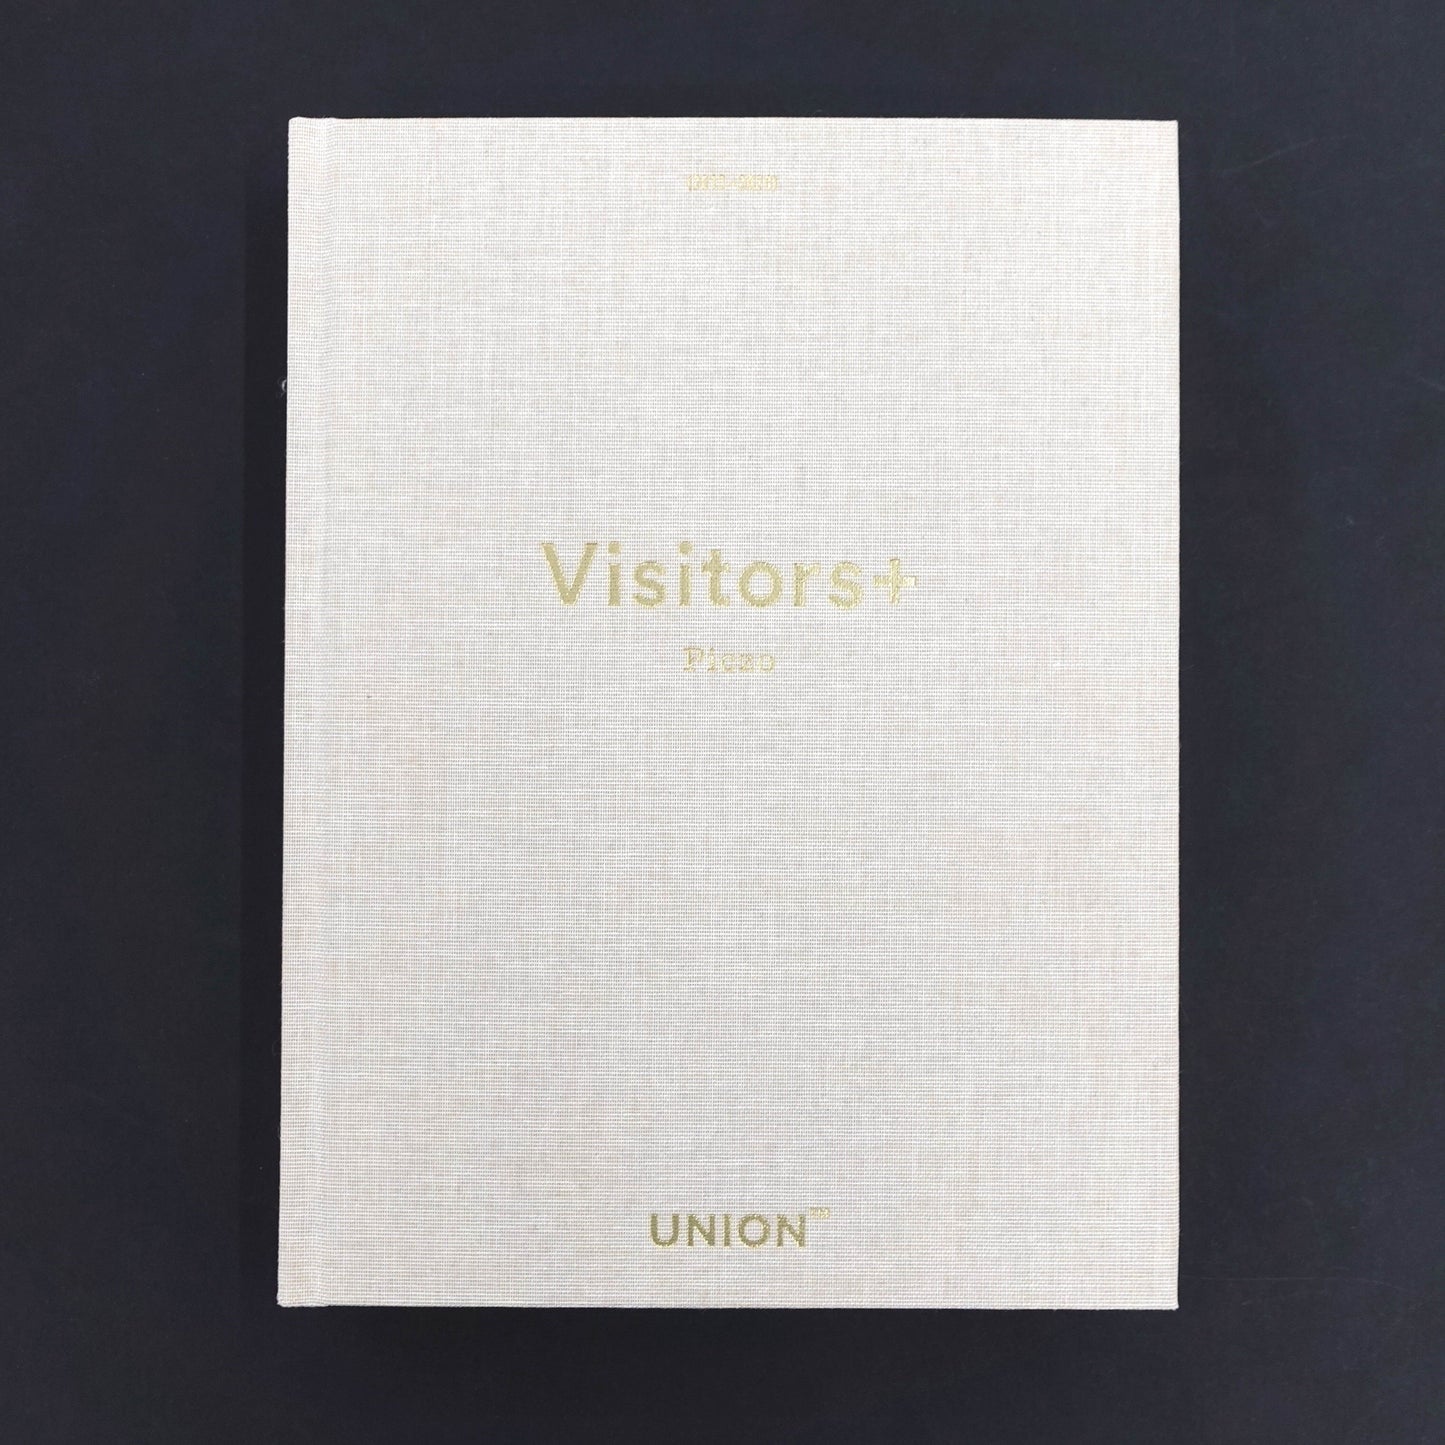 Visitors + by Piczo